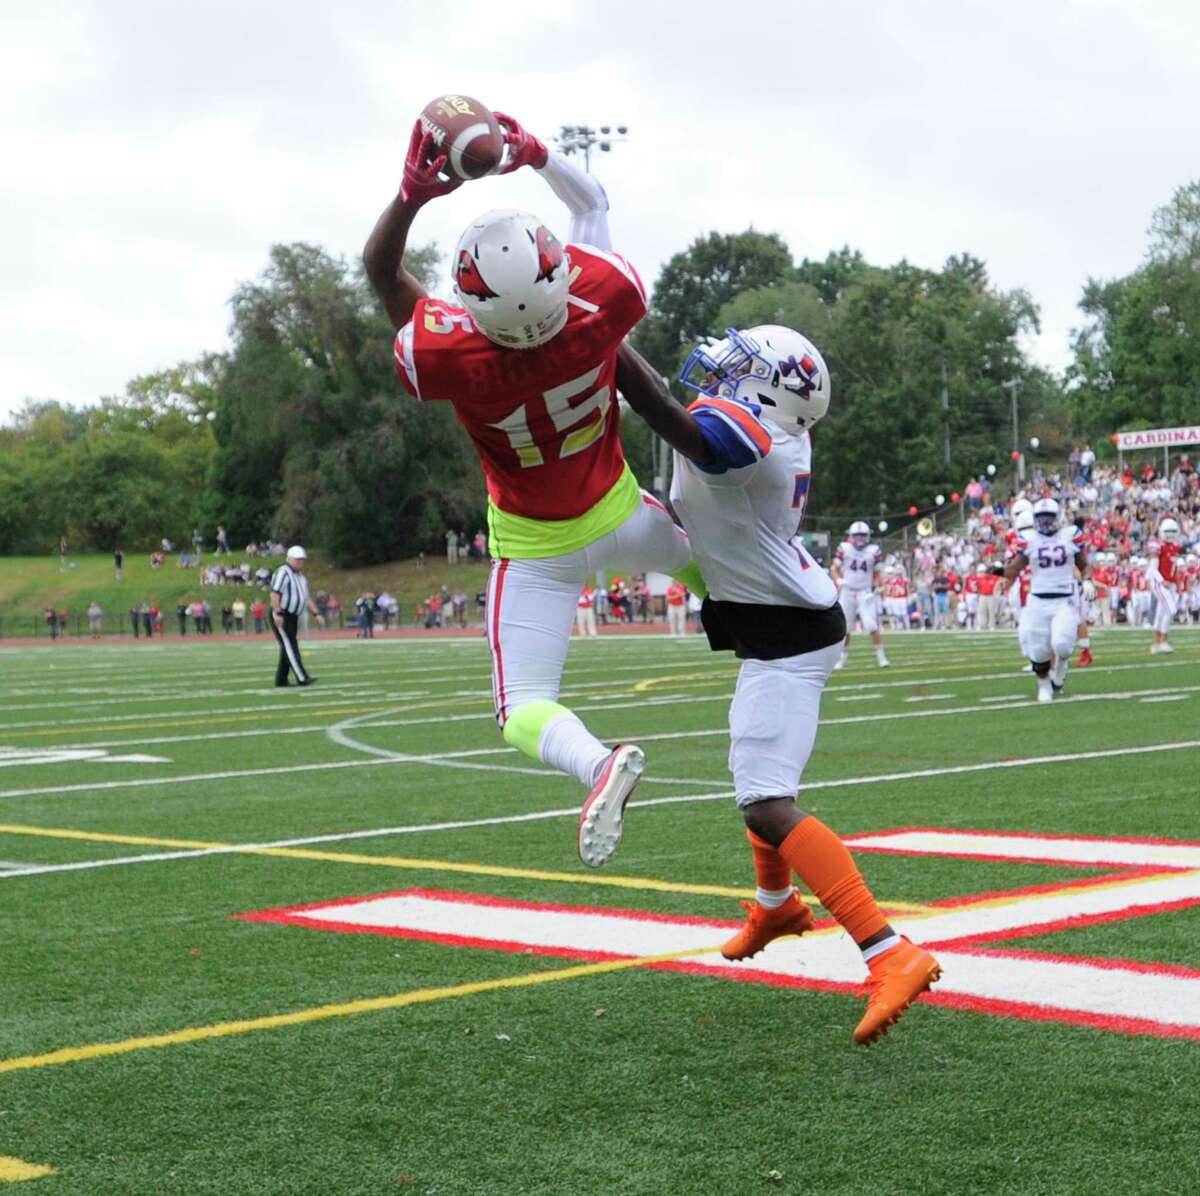 Greenwich's AJ Barber (15) catches a pass for a touchdown against Danbury's Xavier Ross (7) in an FCIAC football season opener at Cardinal Stadium on Sept. 14, 2019 in Greenwich, Connecticut.